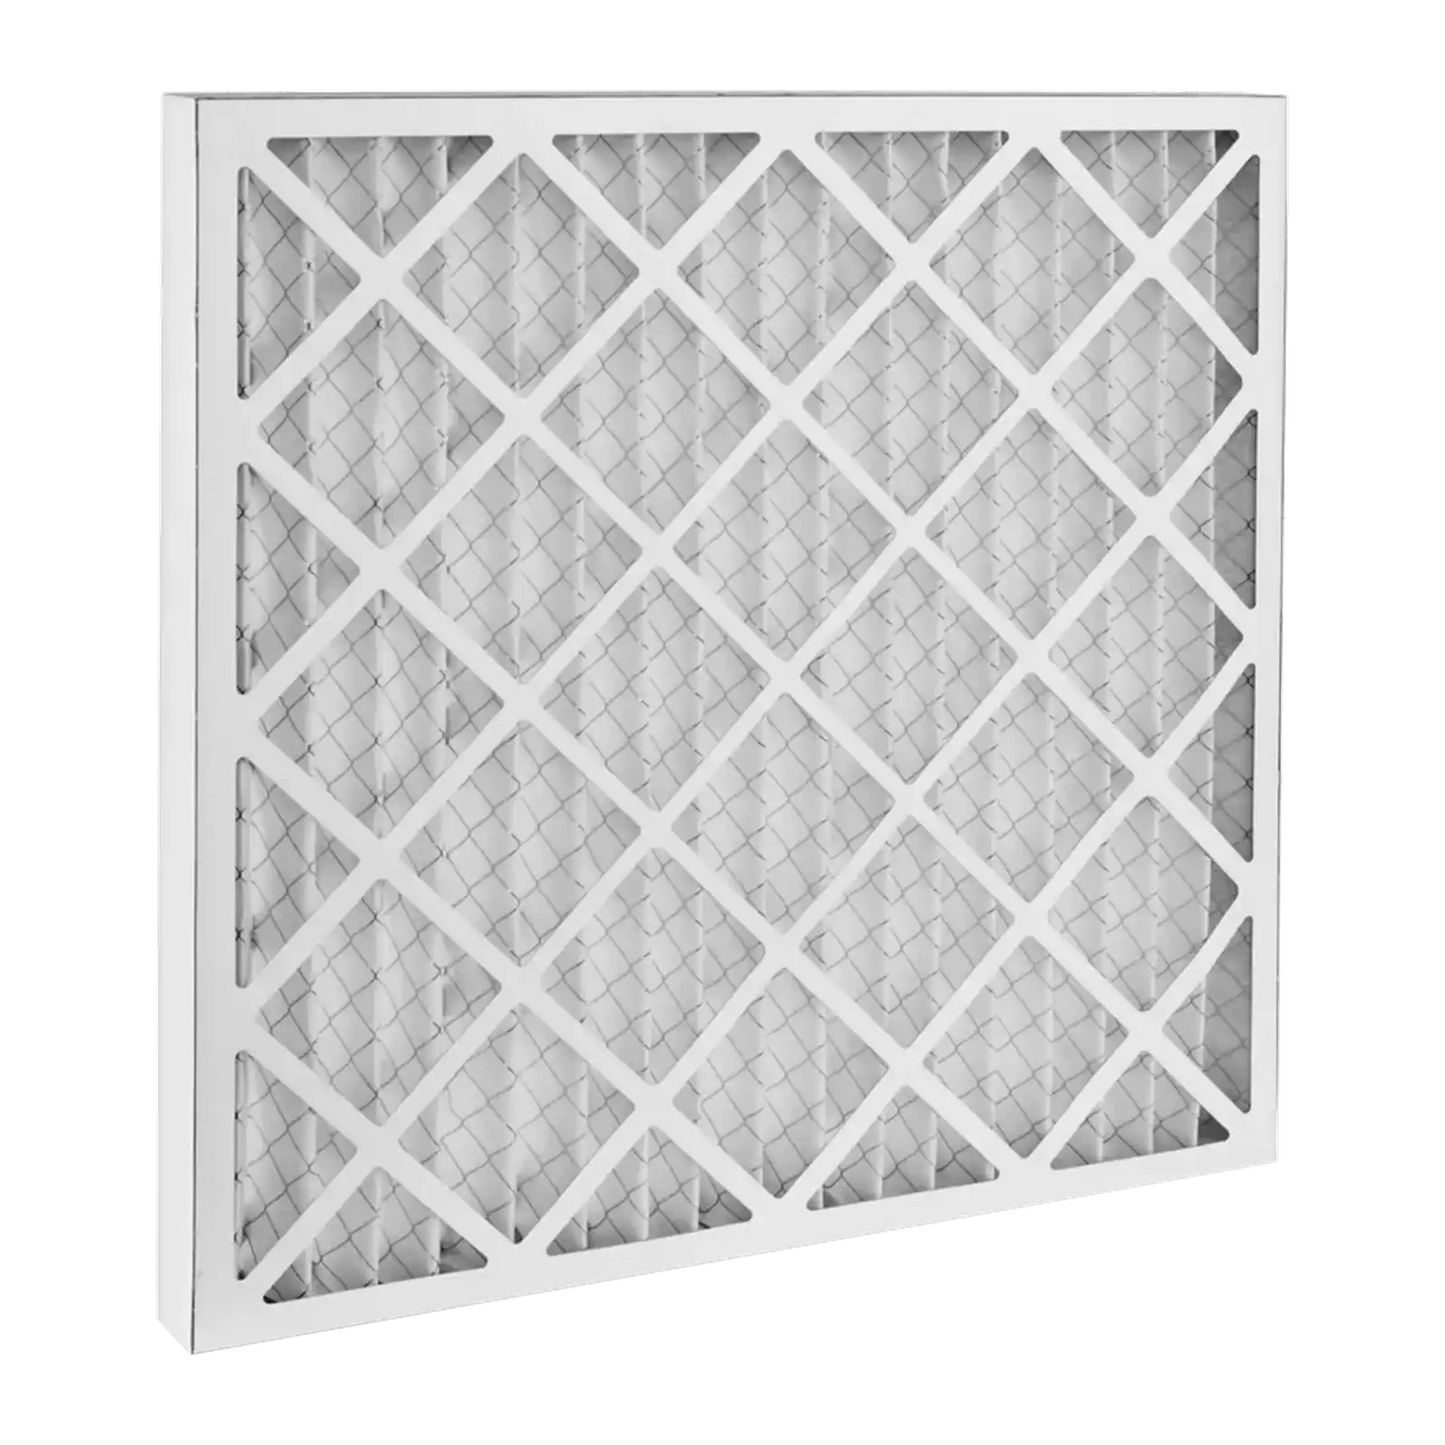 Dafco 16x16x1 Furnace AC Filter - Case of 12